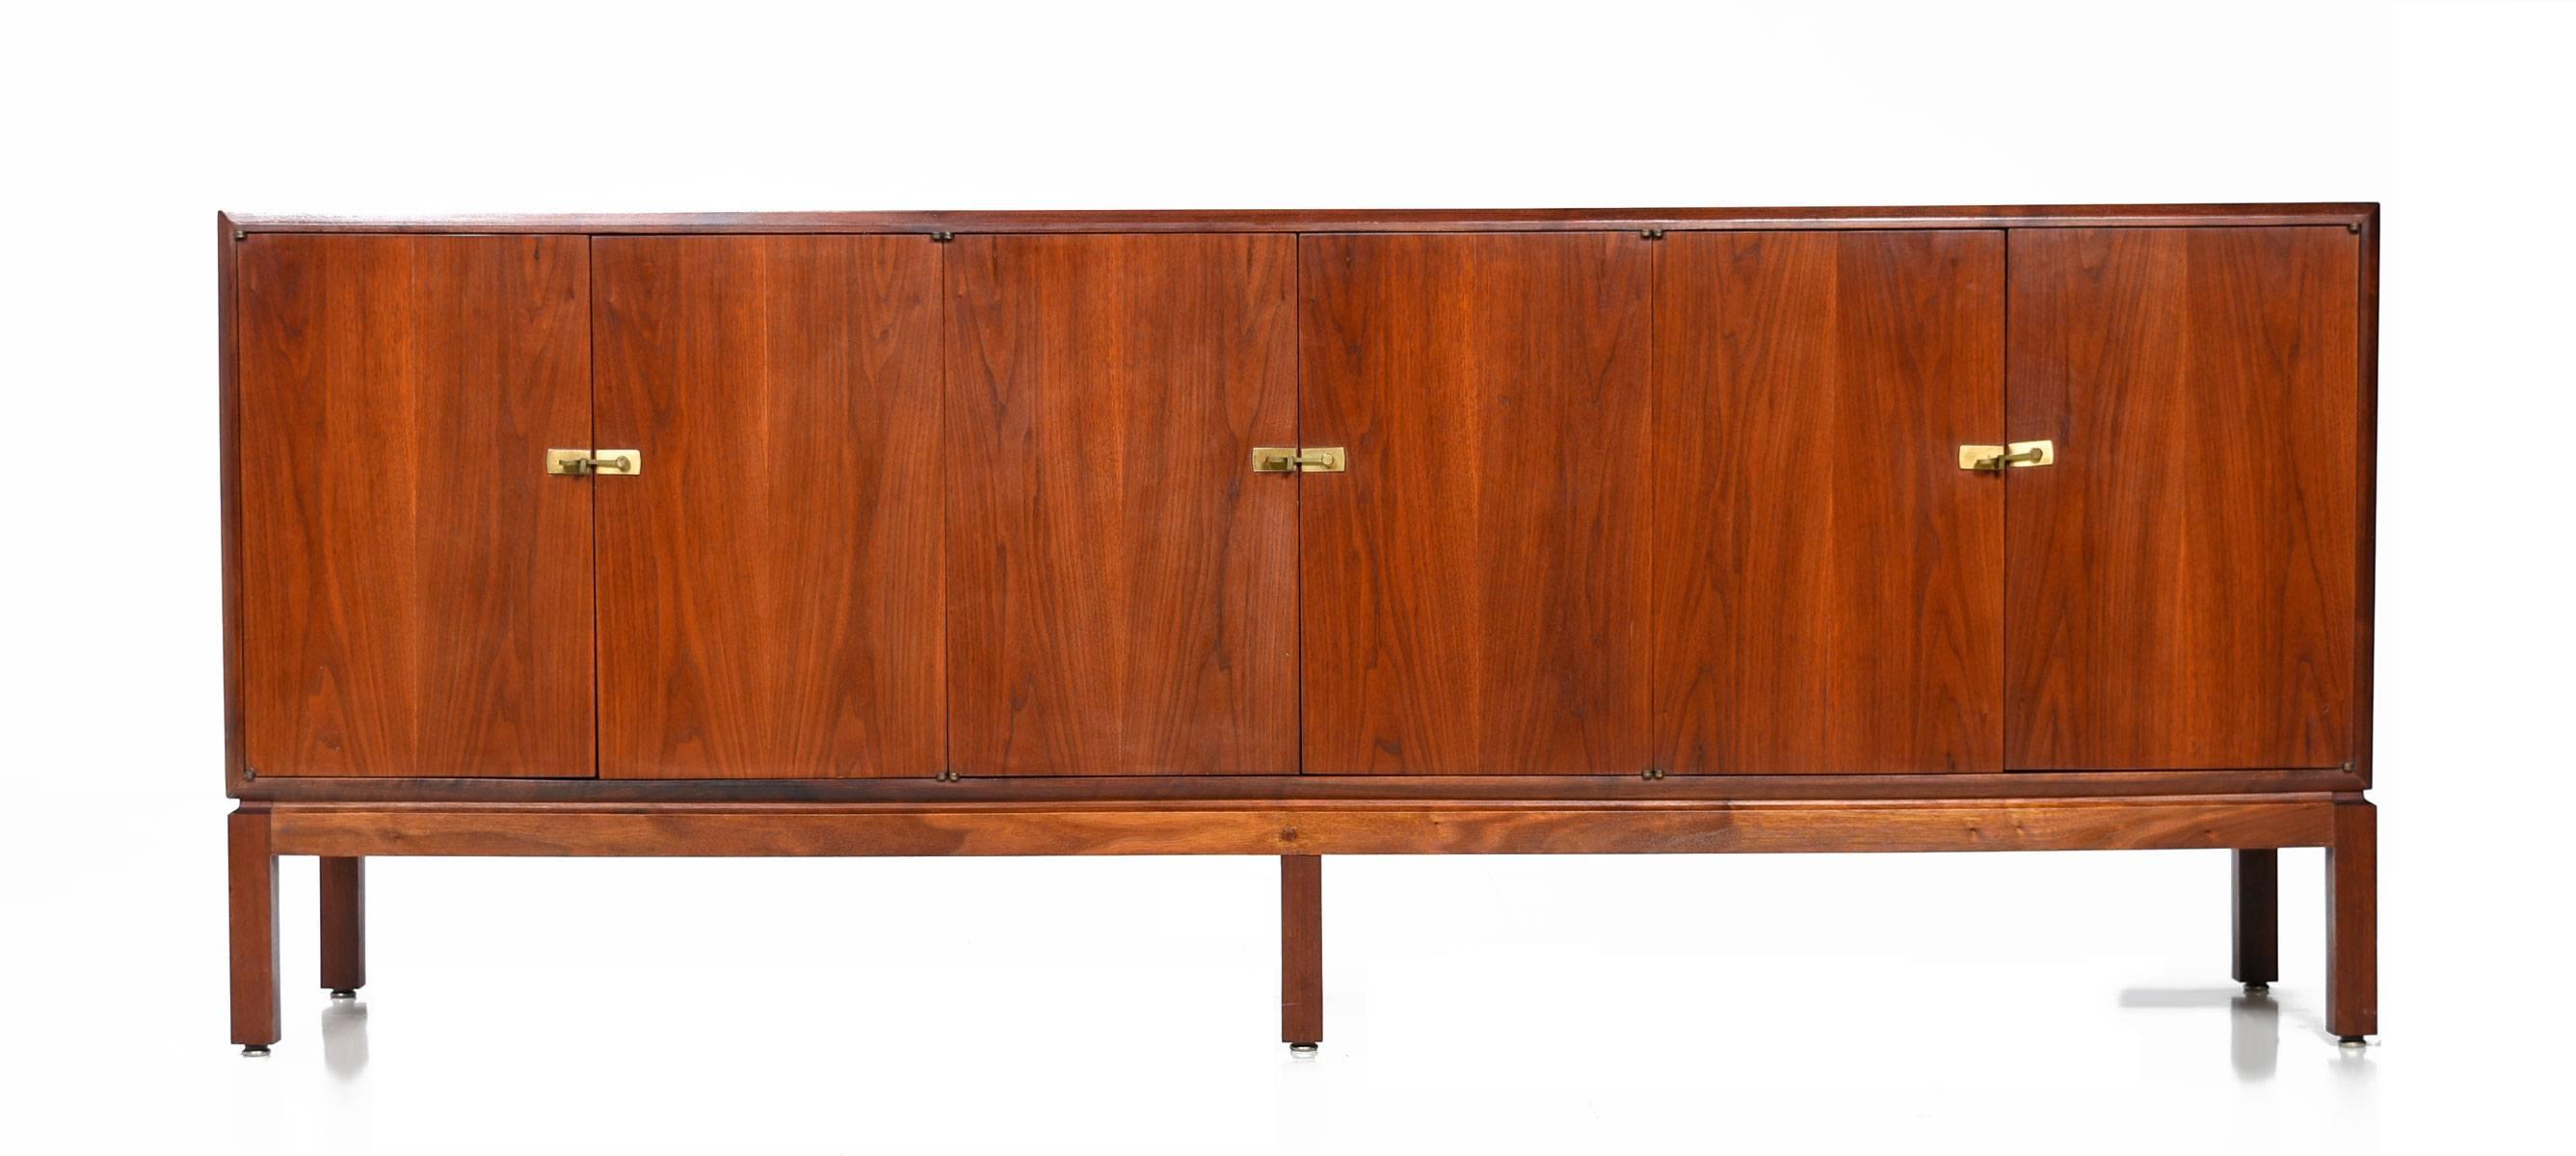 Restored Mid-Century Modern American made walnut credenza. The simple design is embellished with brass latches along the door fronts. This piece is intriguing in the way that it balances modern and traditional themes. The exceptional length is the